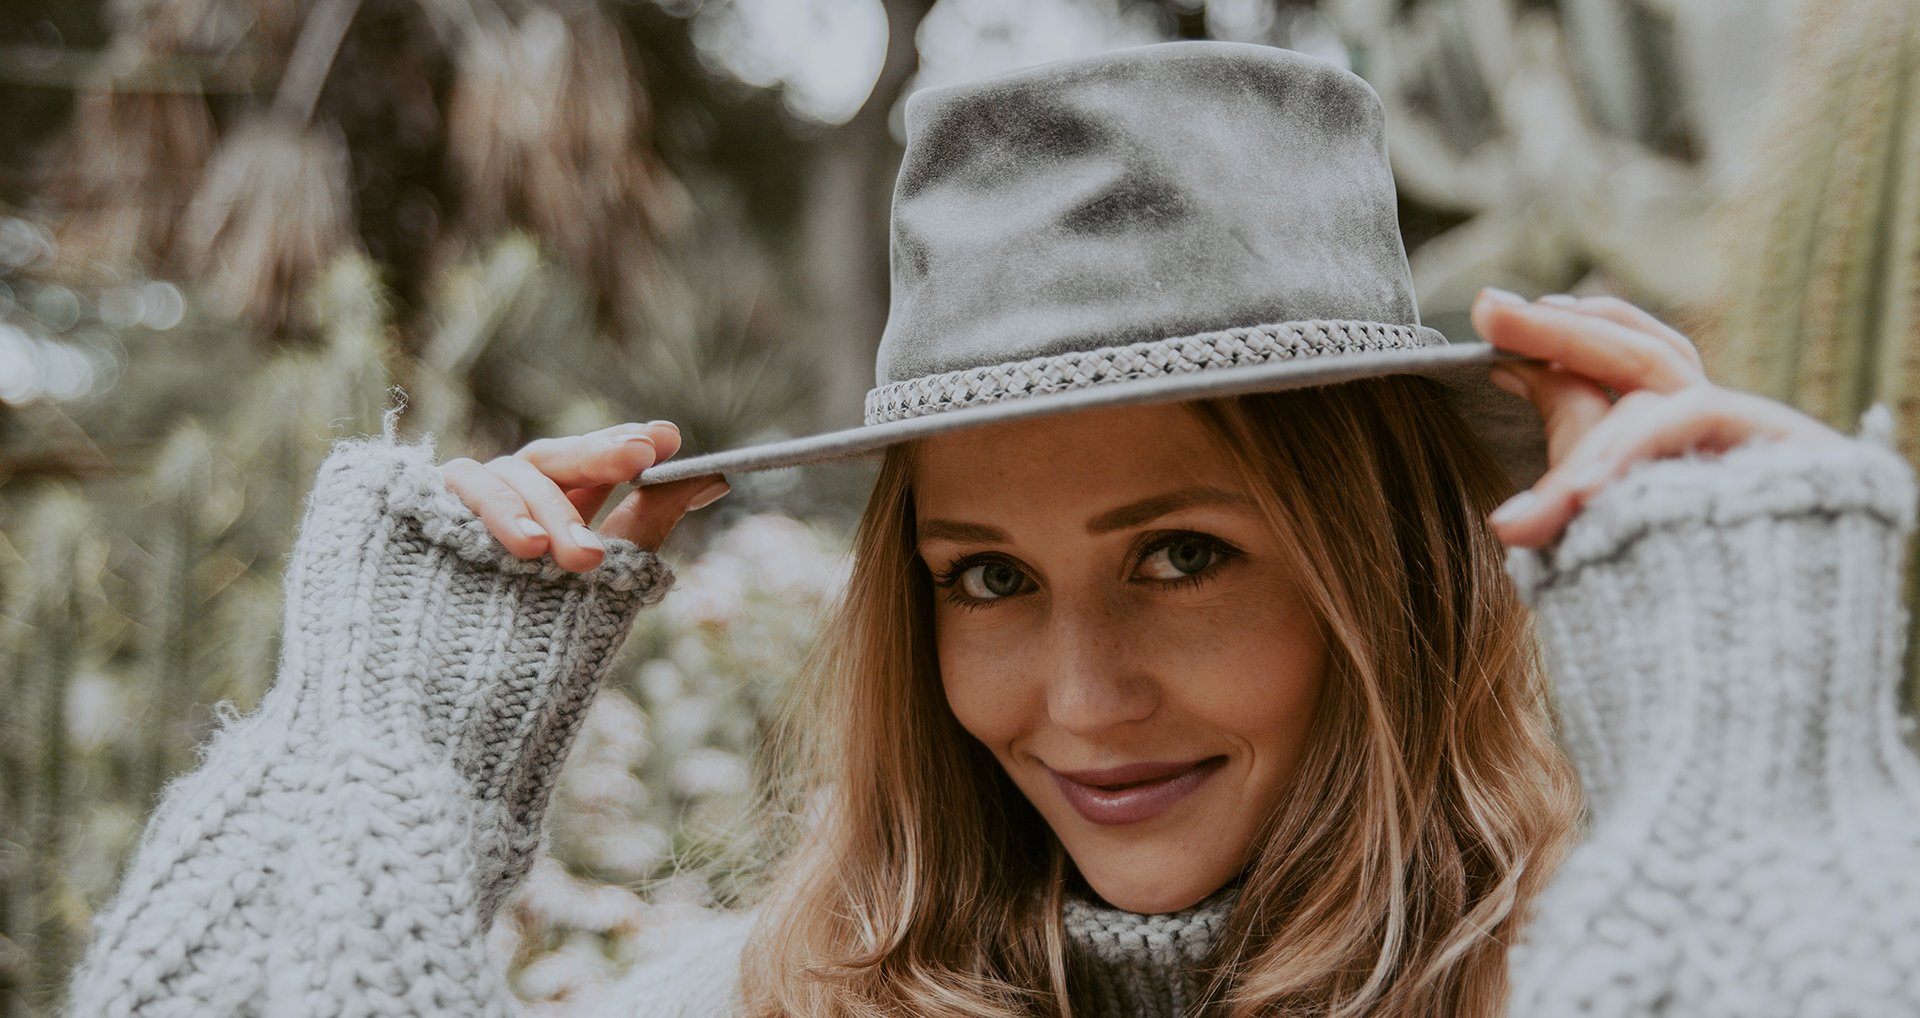 Women's Hat Styles - Why Wear a Hat for Every Occasion